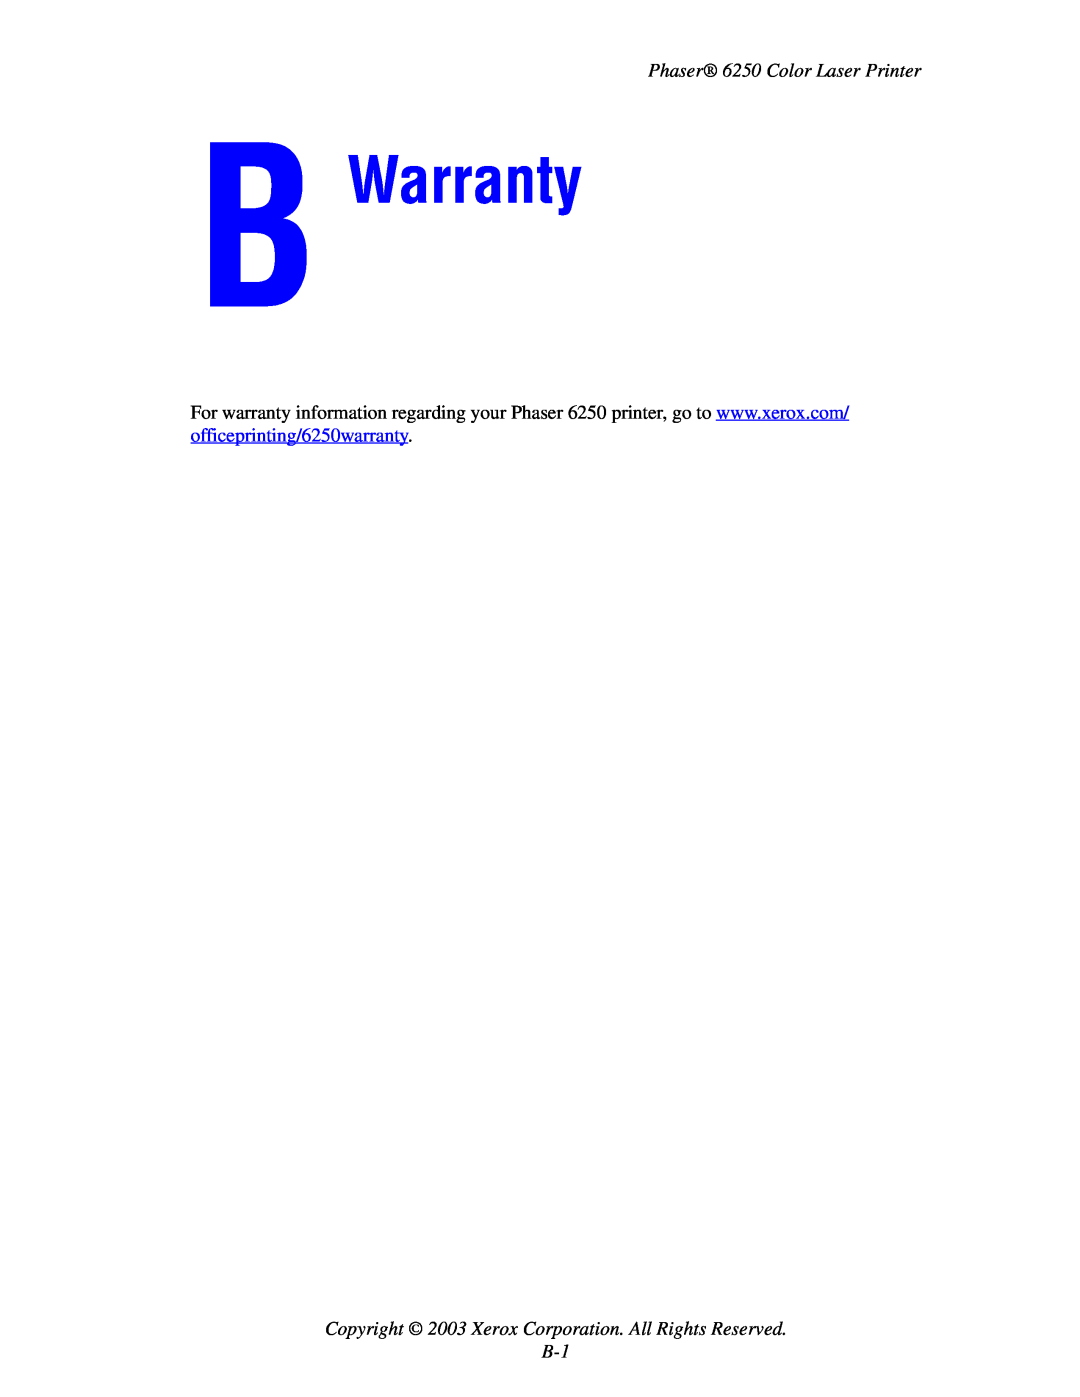 Xerox manual Warranty, Copyright 2003 Xerox Corporation. All Rights Reserved B-1, Phaser 6250 Color Laser Printer 